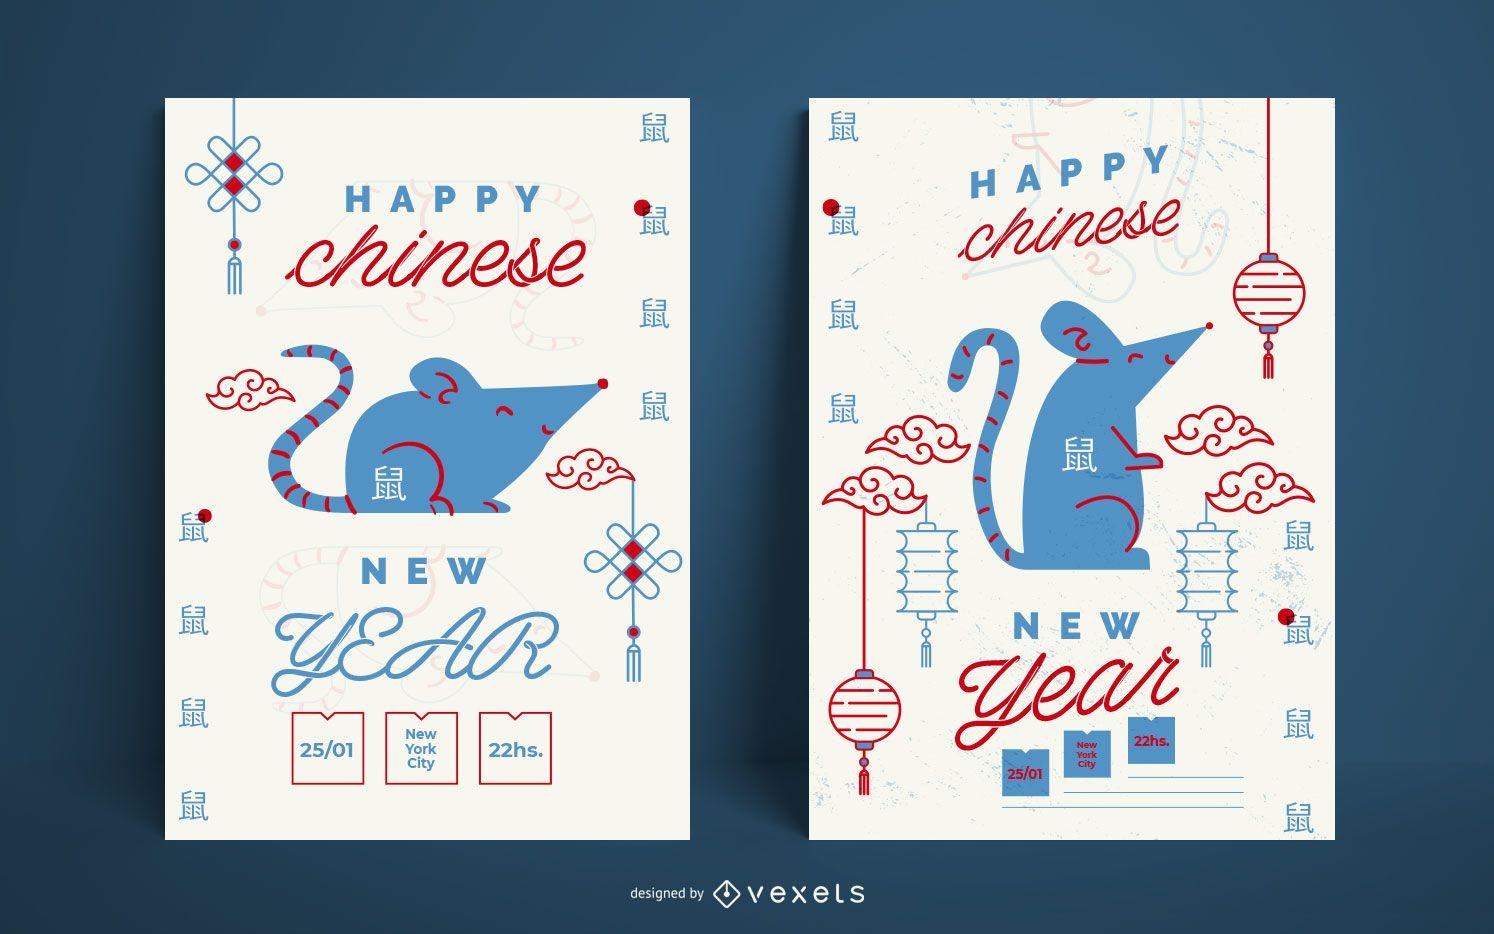 Happy chinese new year poster